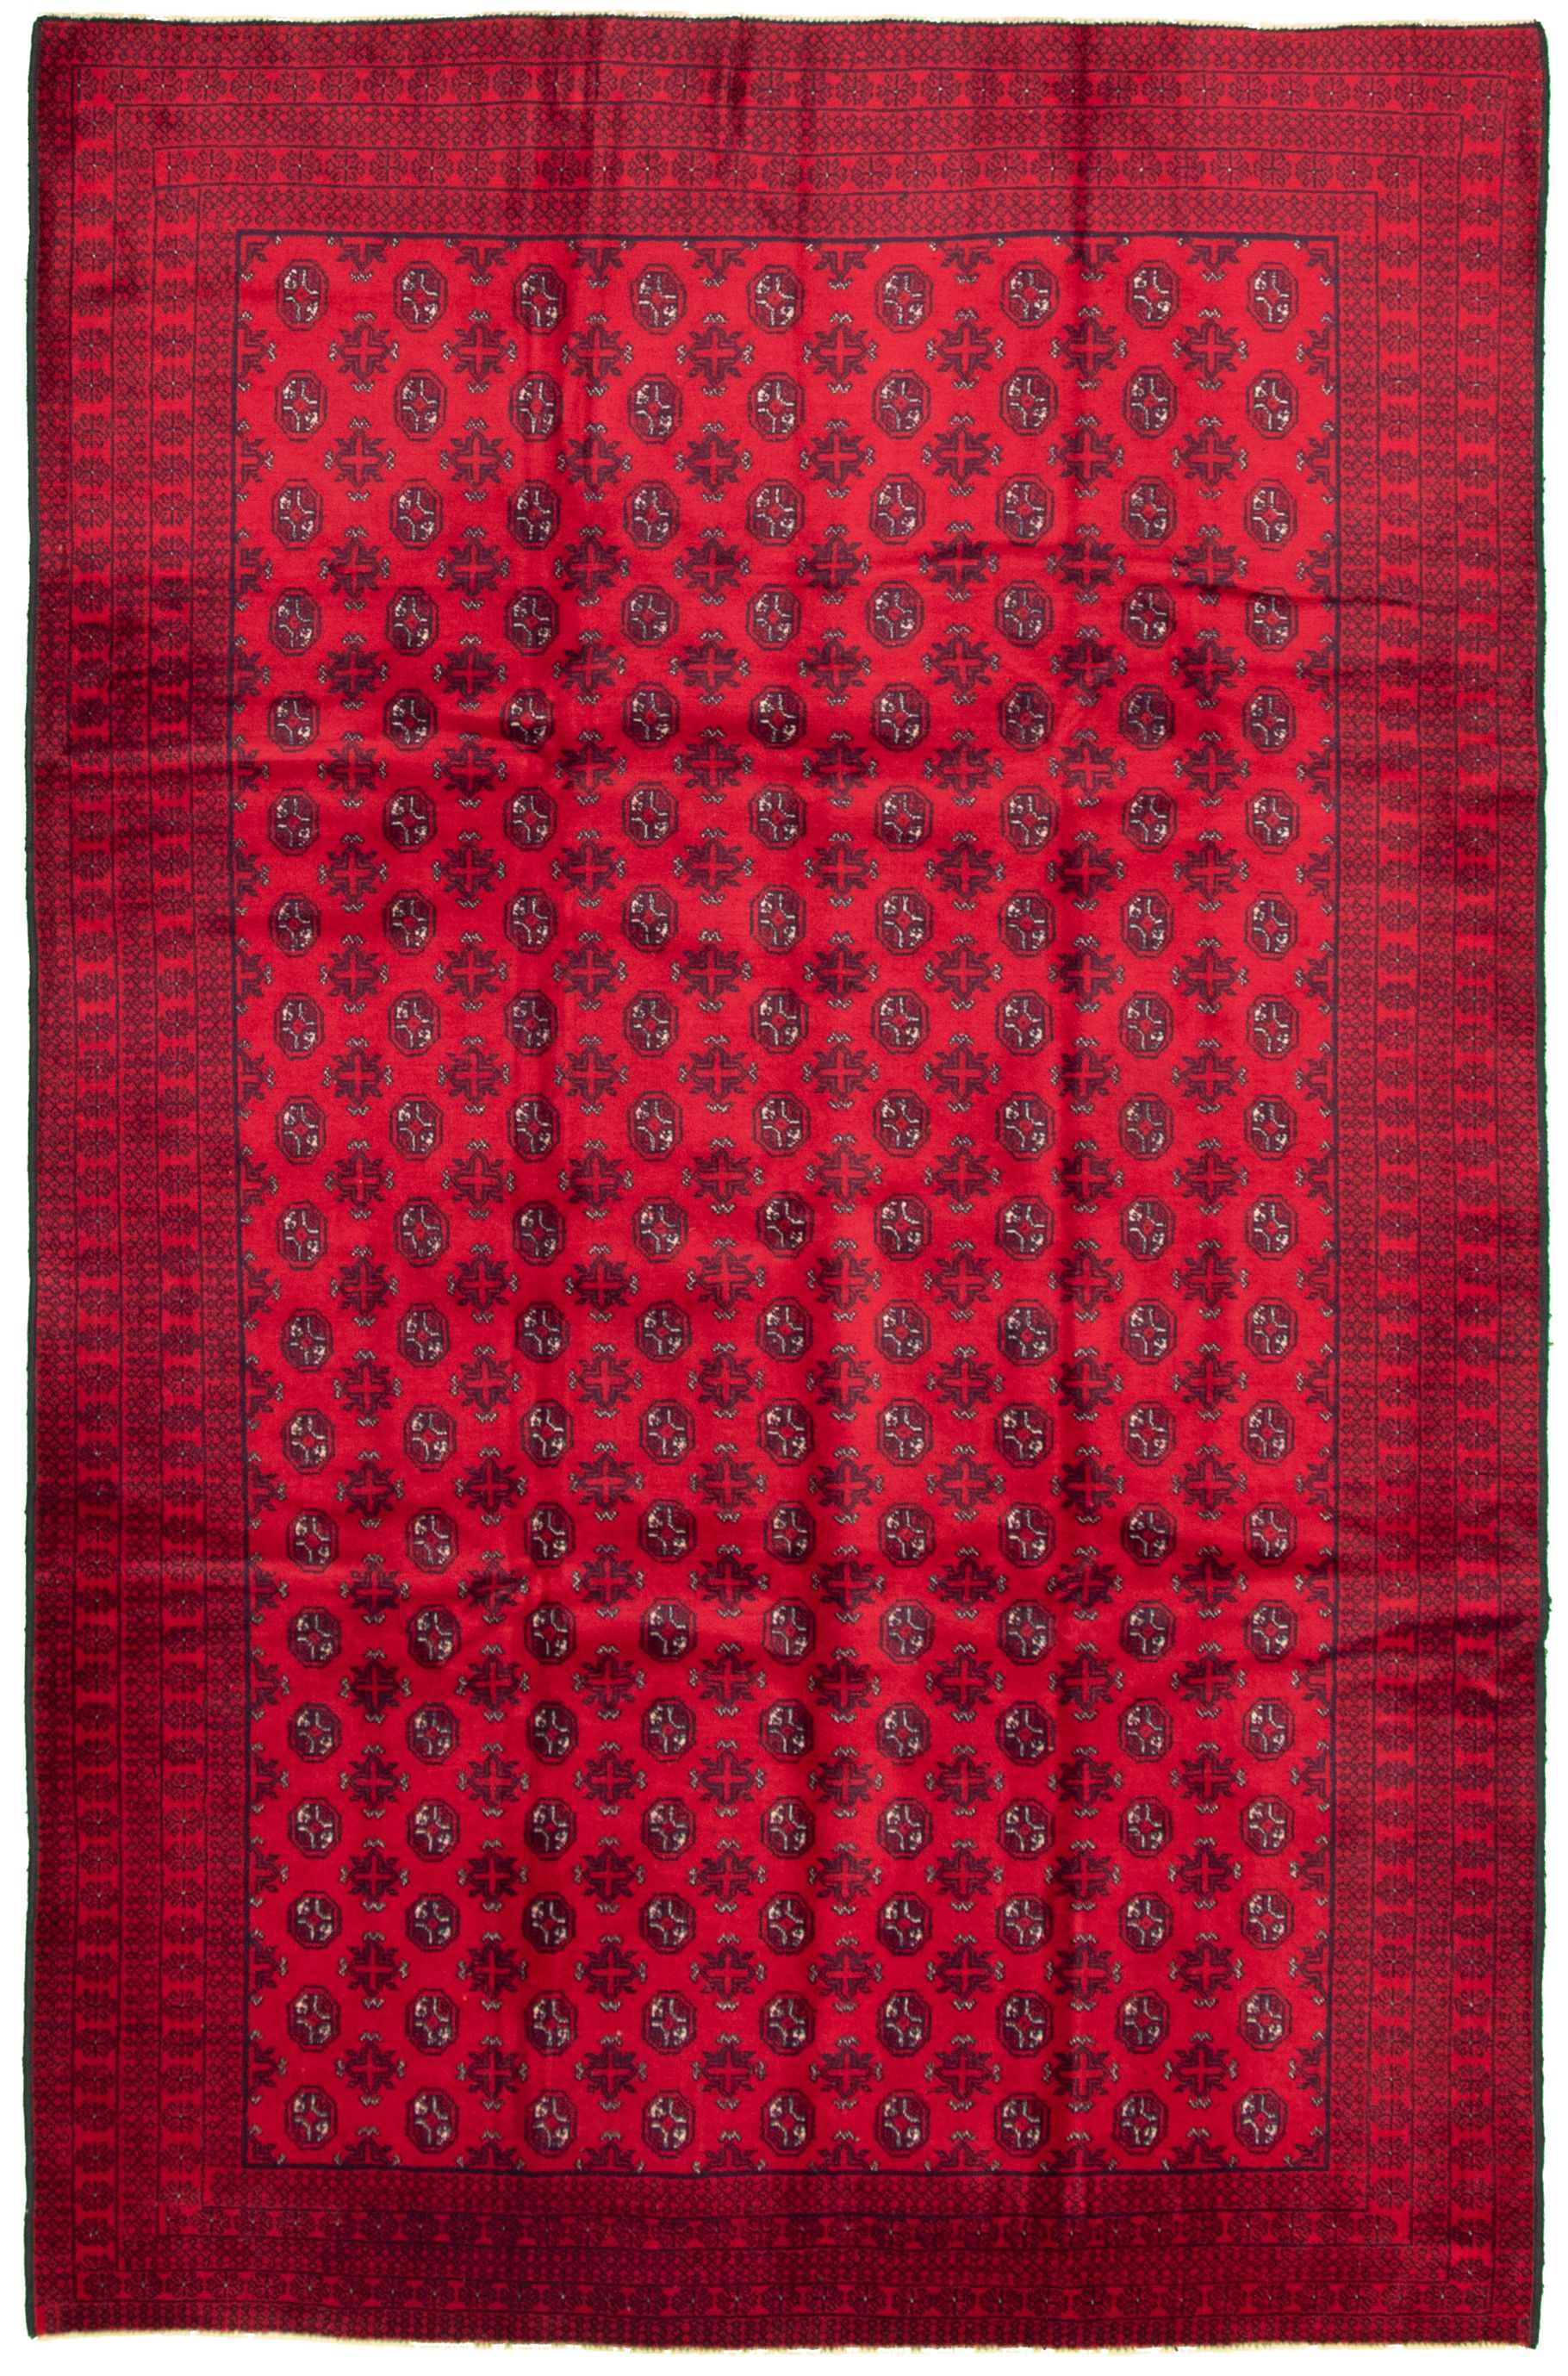 Hand-knotted Khal Mohammadi Red Wool Rug 6'2" x 9'10" Size: 6'2" x 9'10"  